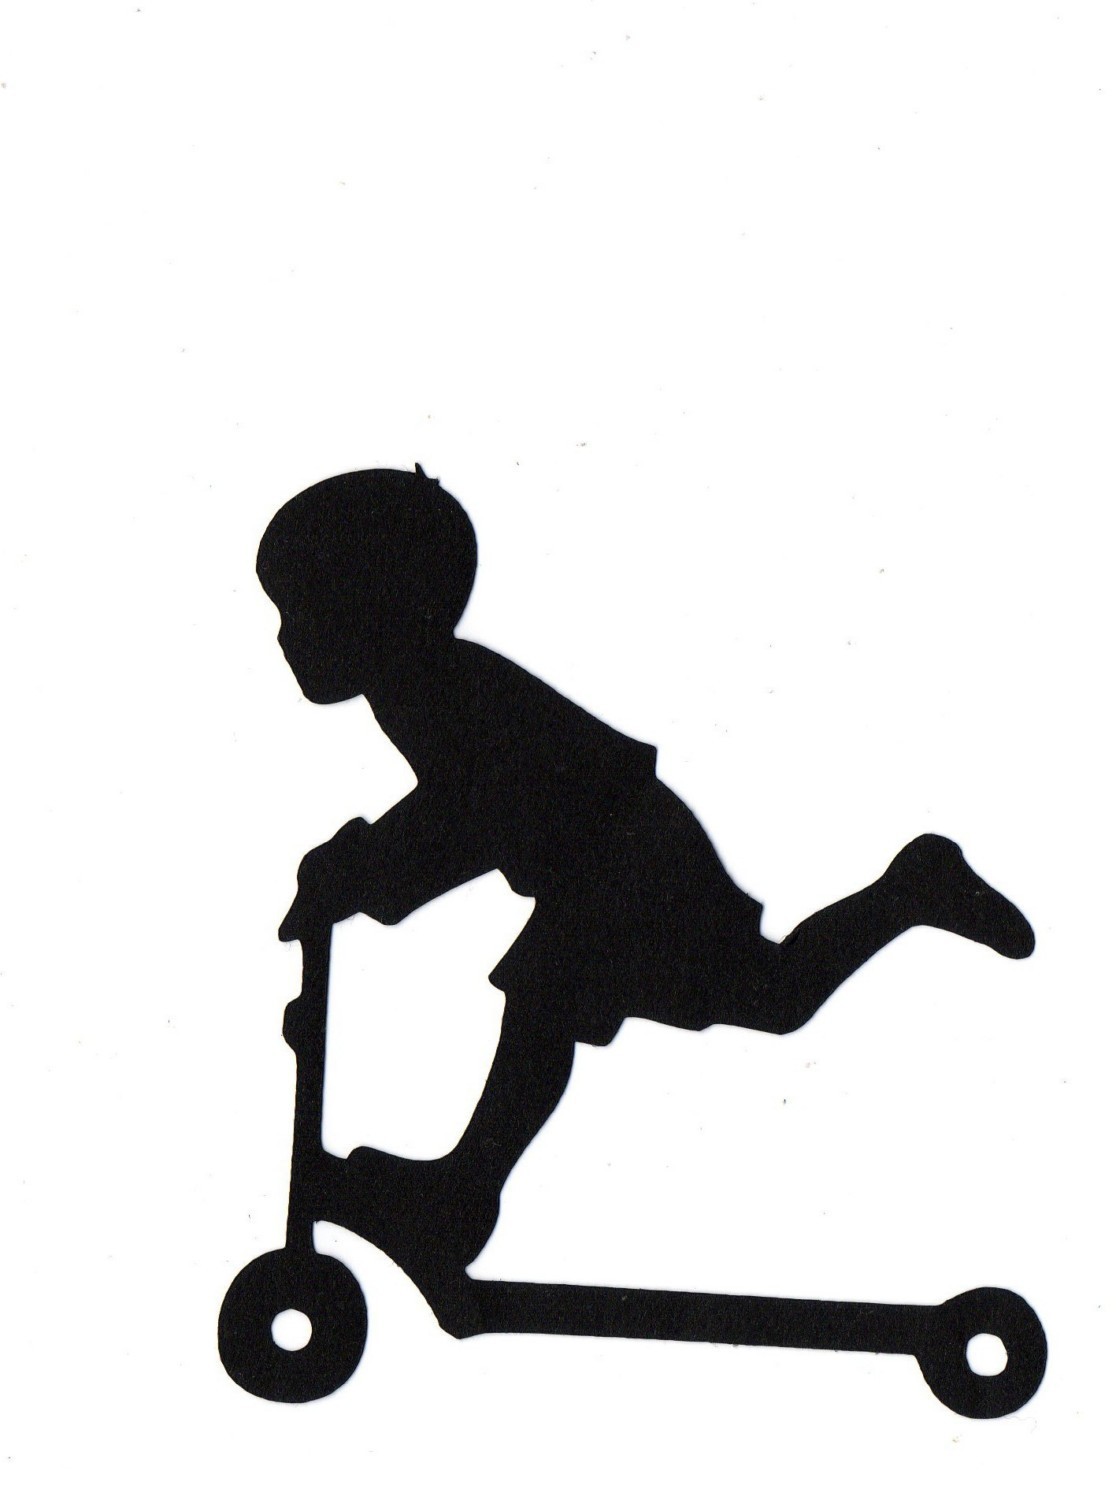 BOY riding scooter Child Silhouette die by simplymadescrapbooks